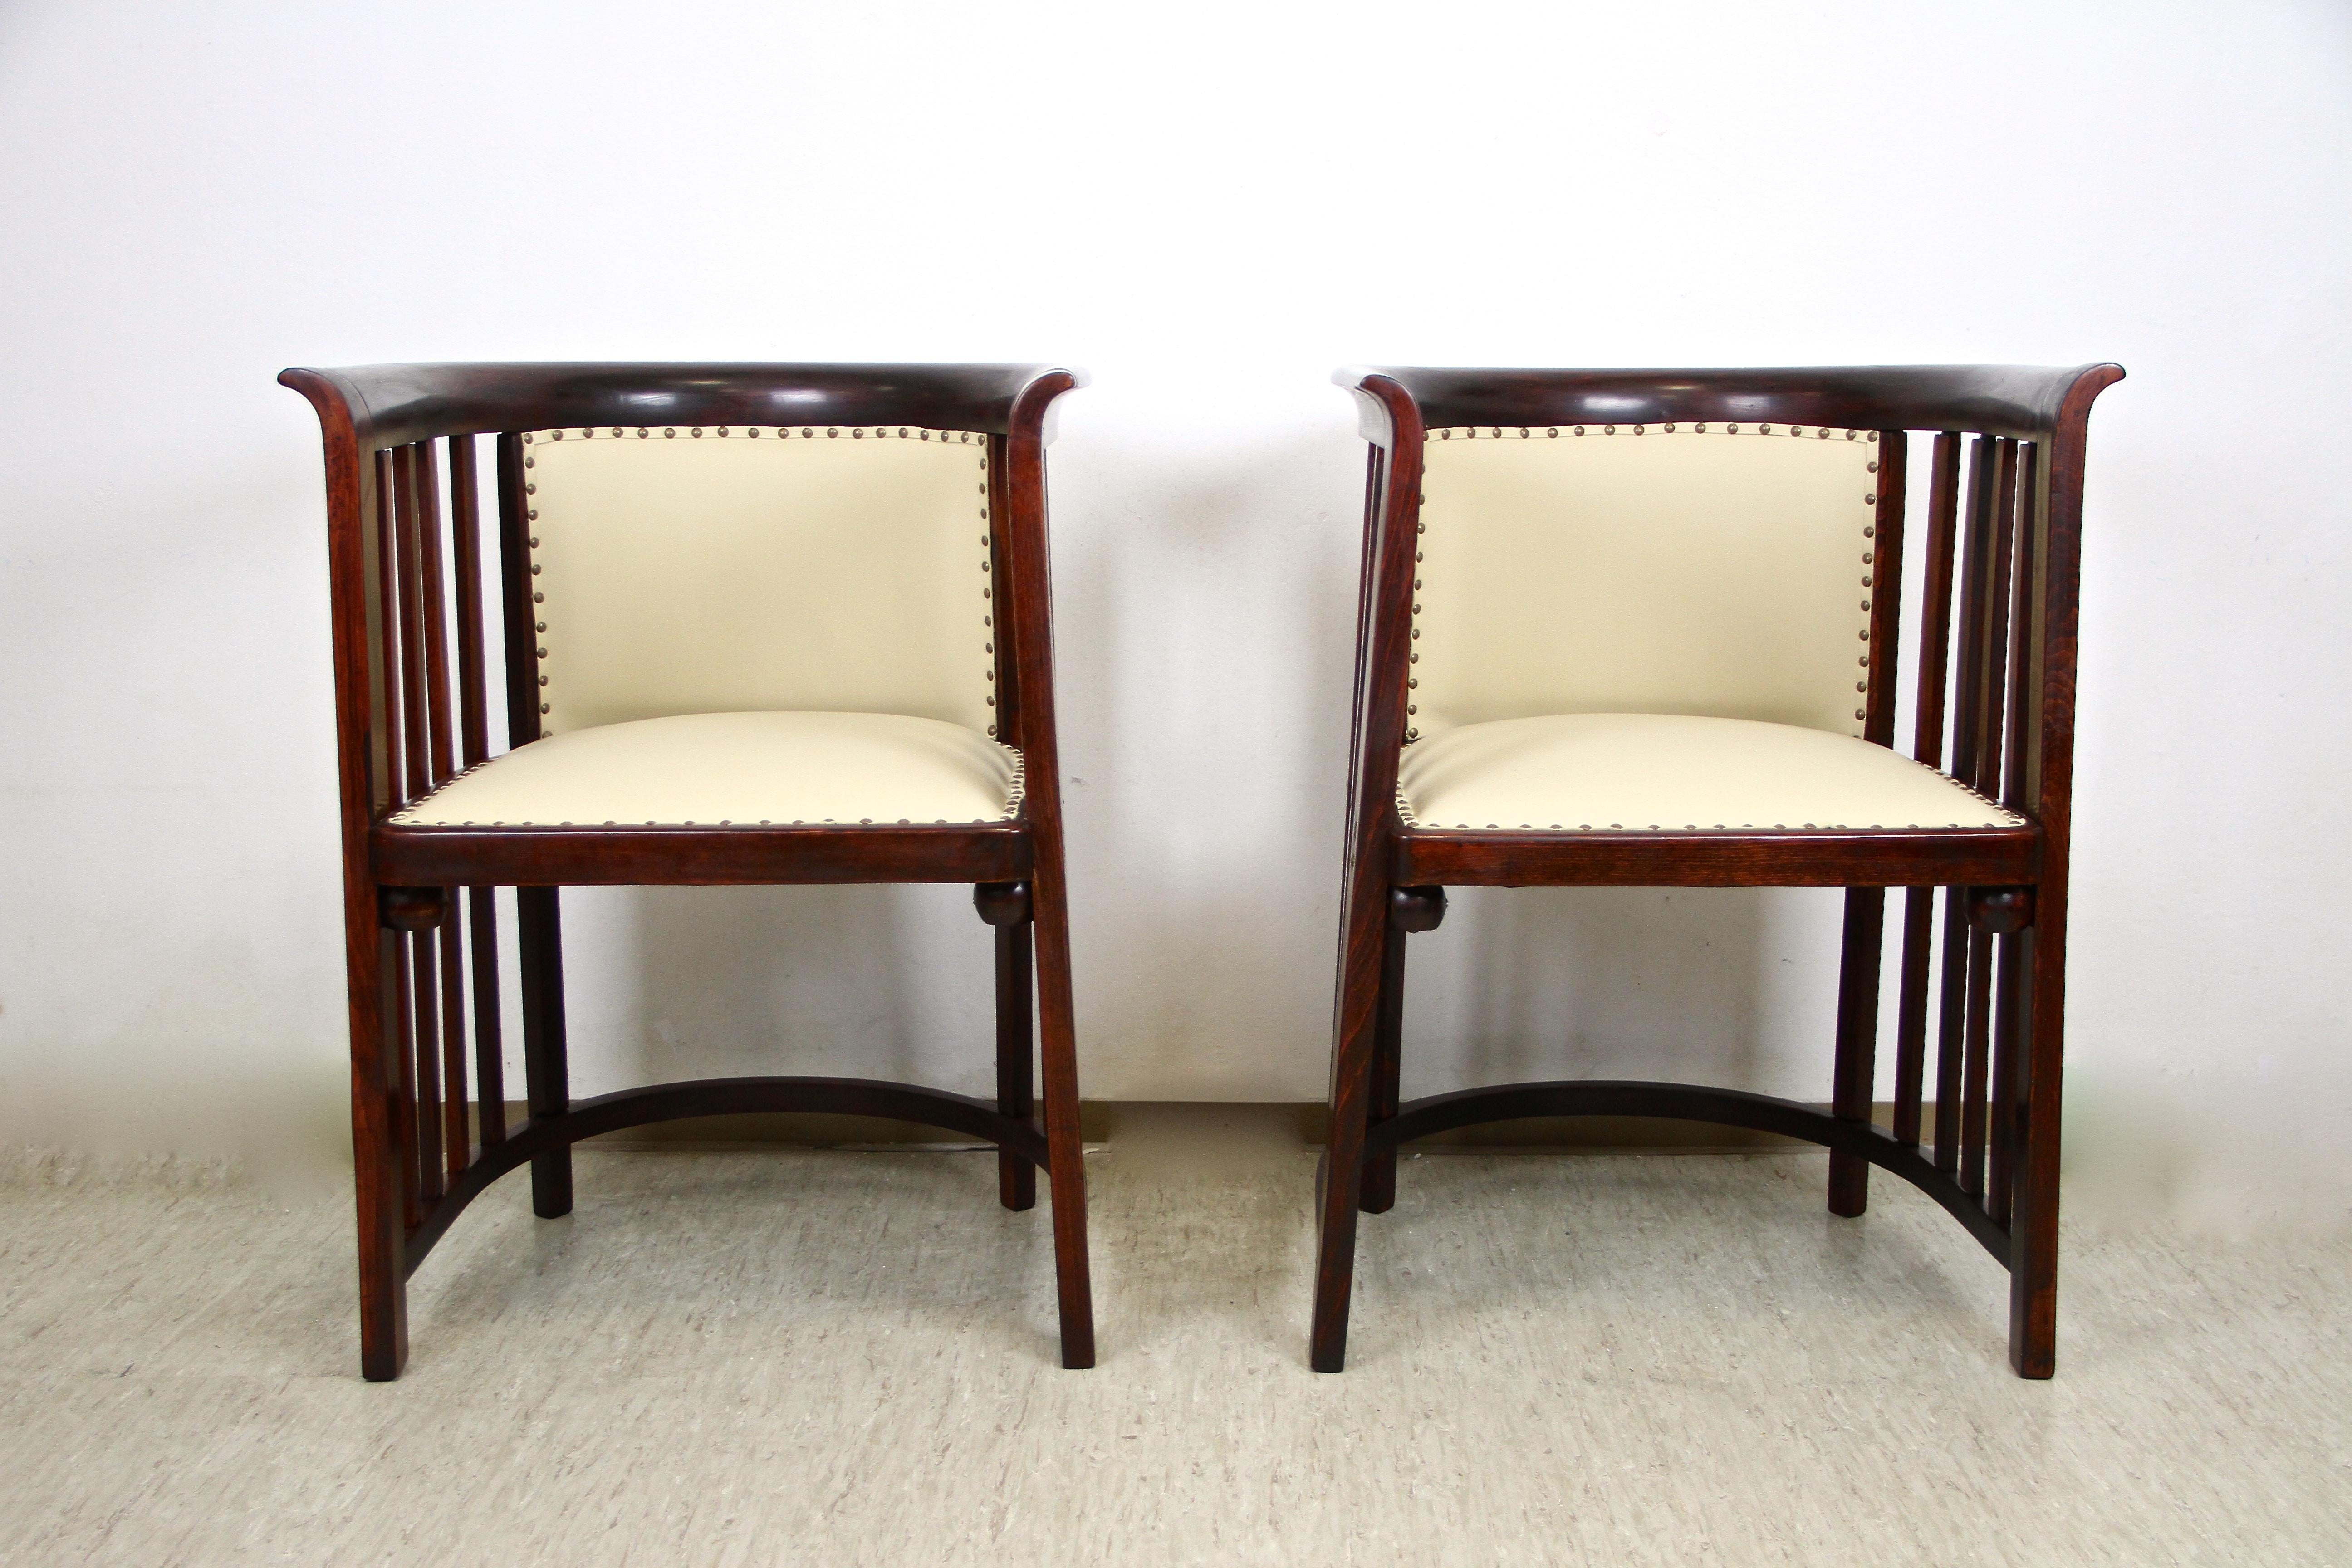 Austrian Pair of Bentwood Armchairs by J. Hoffmann and Thonet Table, Austria, circa 1905